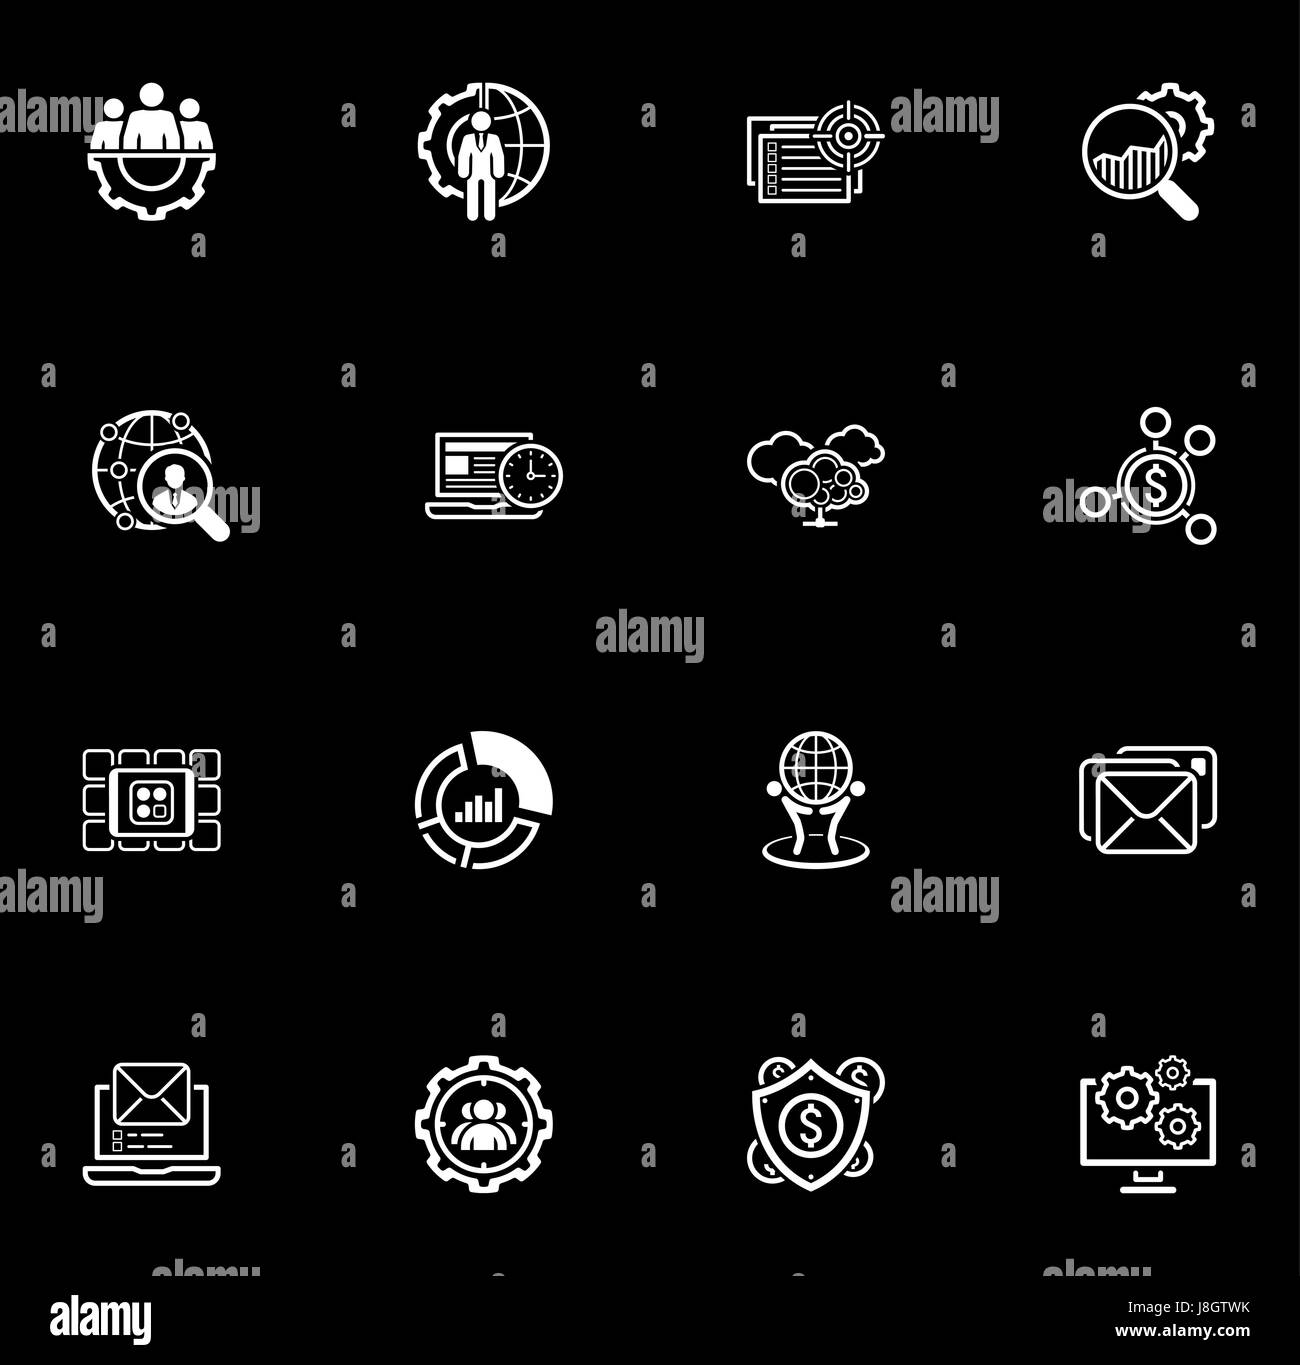 Flat Design Business Icons Set. Stock Vector